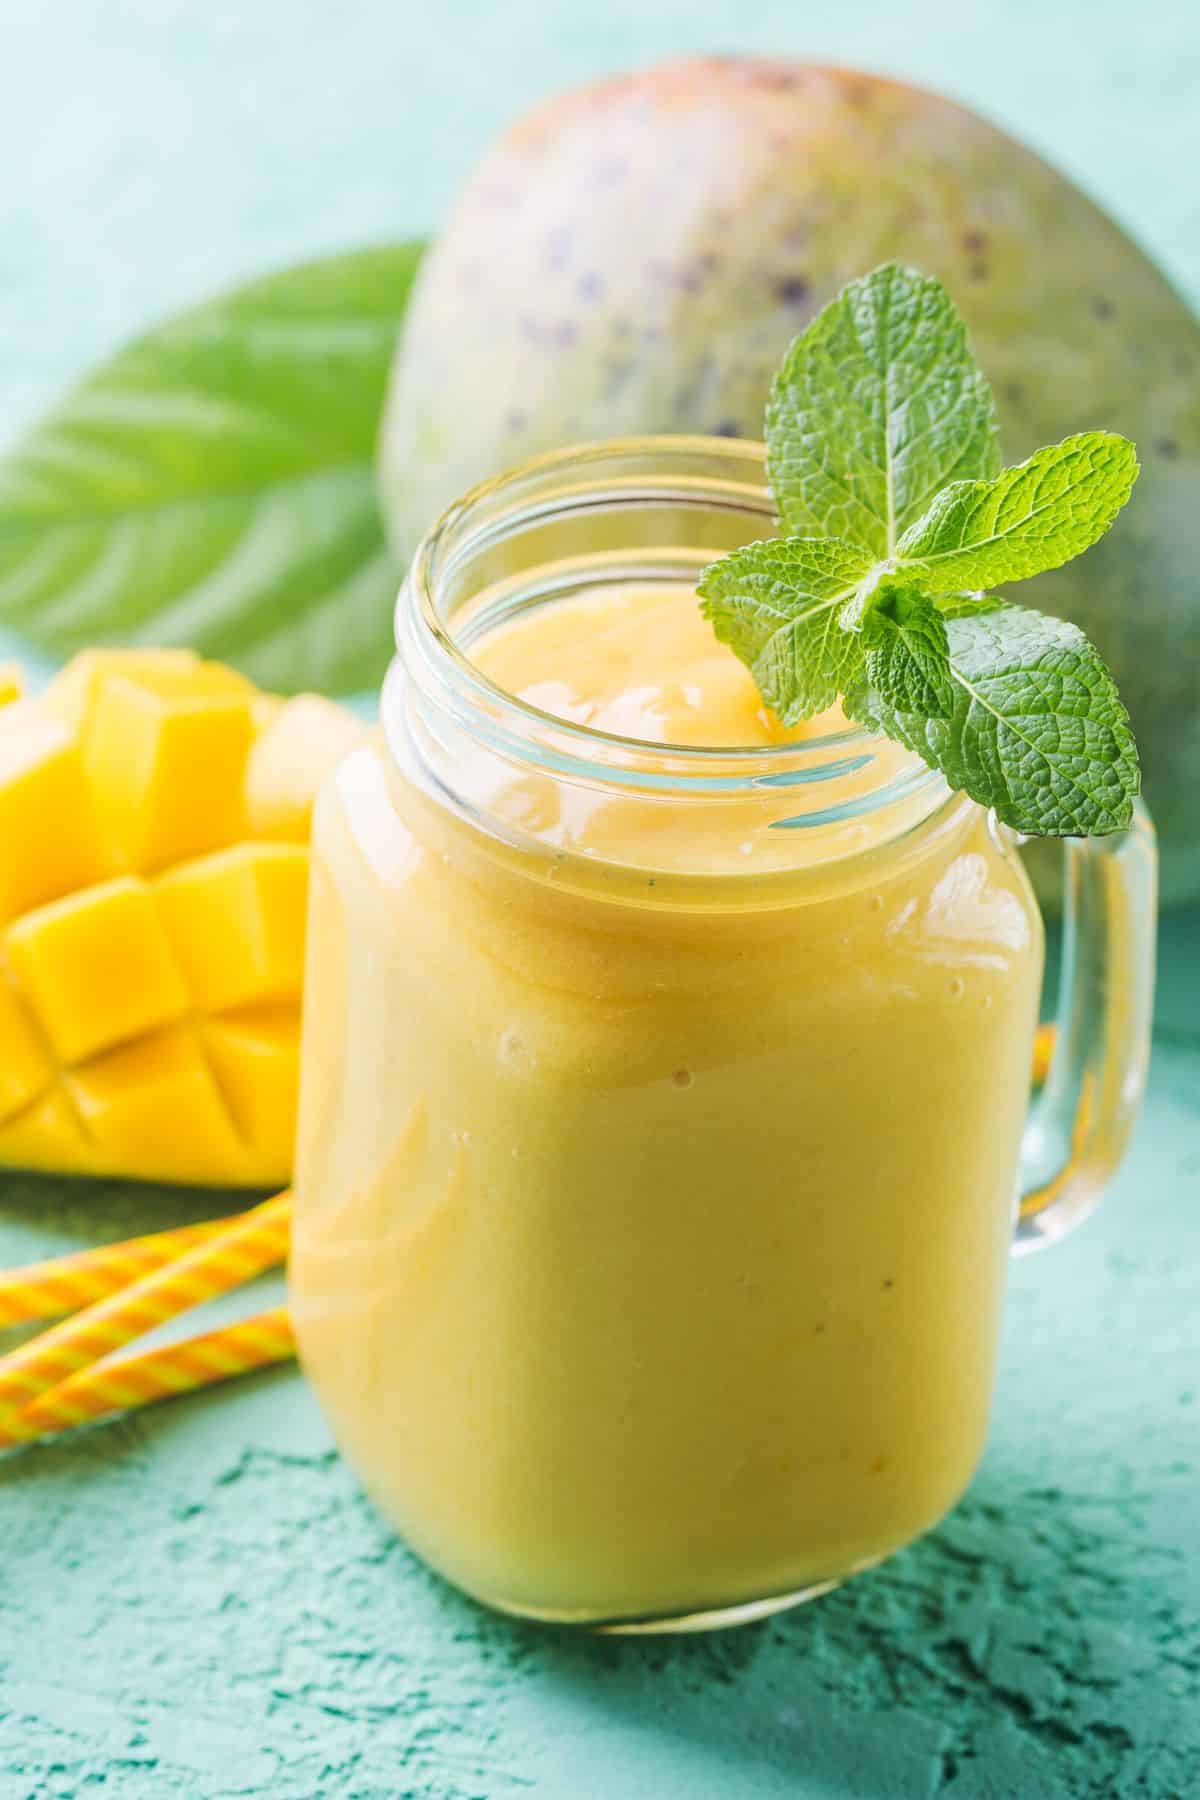 https://www.cleaneatingkitchen.com/wp-content/uploads/2022/09/yellow-smoothie-in-a-jar.jpg